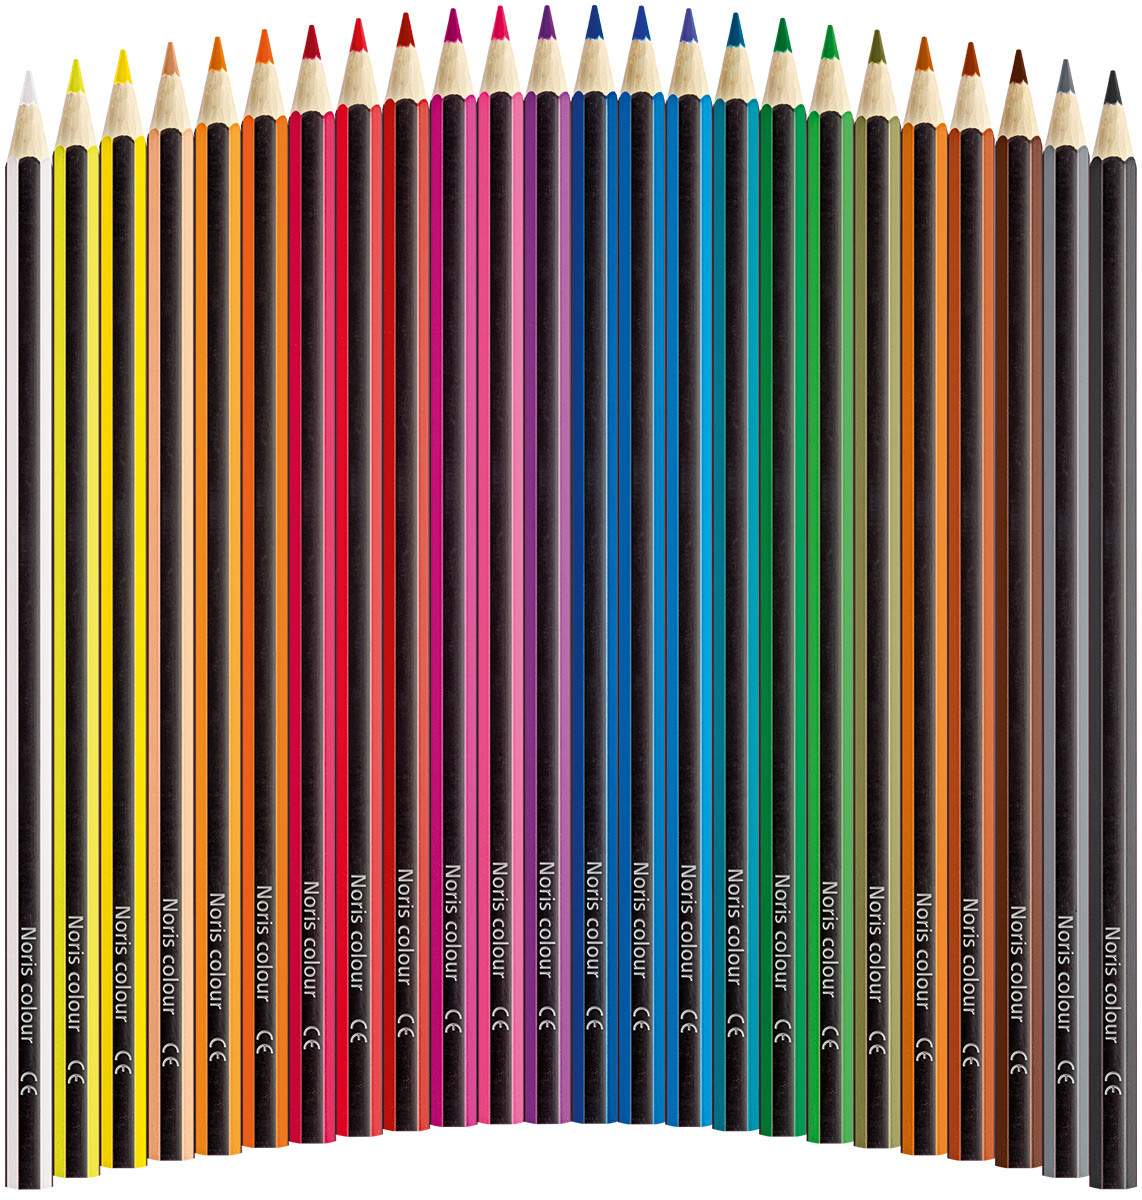 Details about   1 pack of 12 x Staedtler Noris Coloured Pencils 185 C12 in stock 